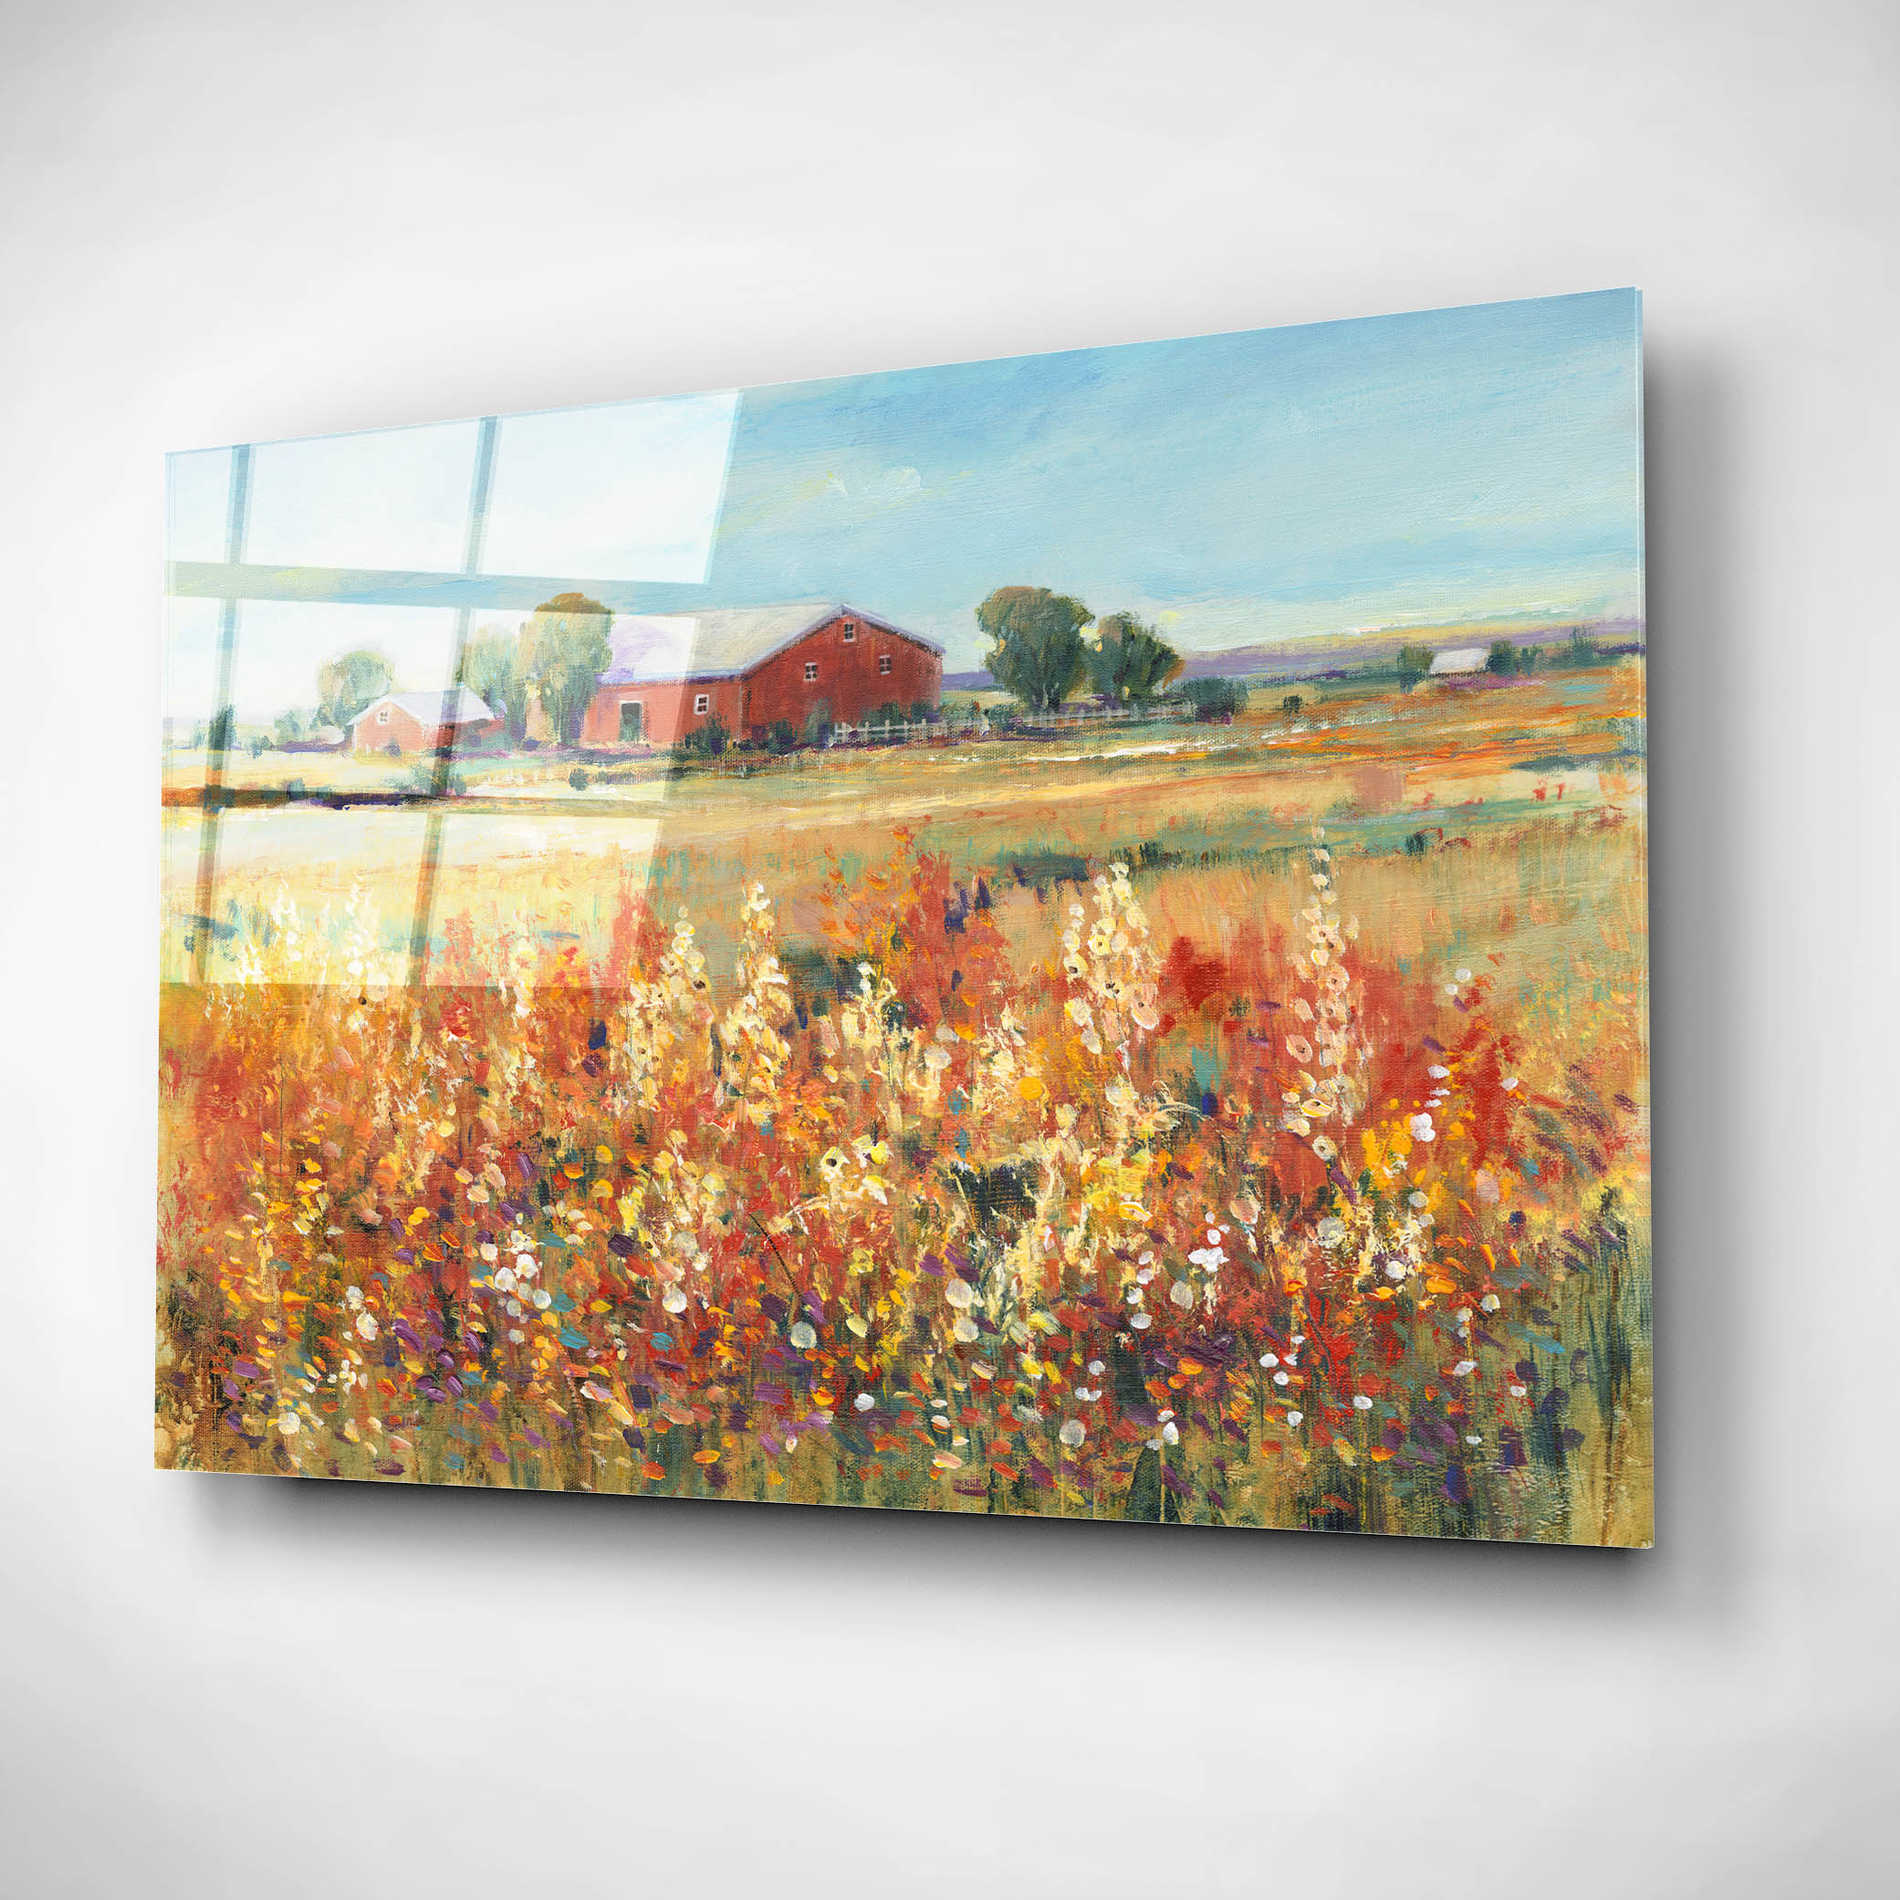 Epic Art 'Country View II' by Tim O'Toole, Acrylic Glass Wall Art,16x12